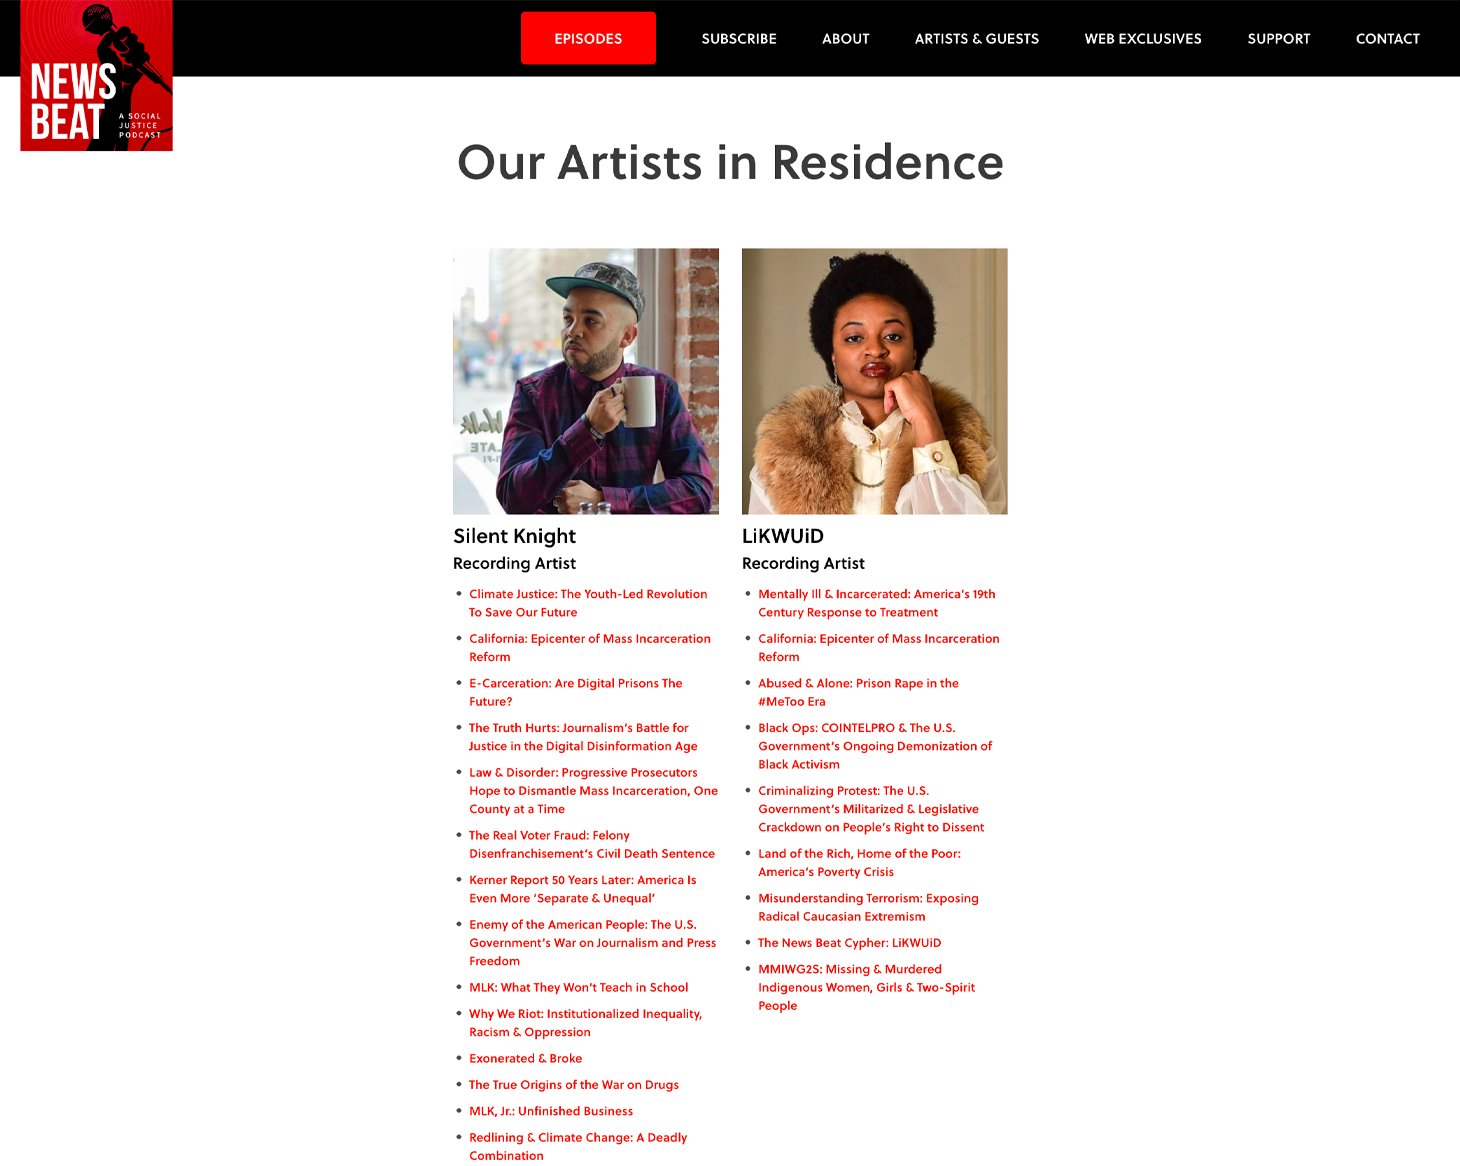 screenshot of Artists in Residence Program image from News Beat website